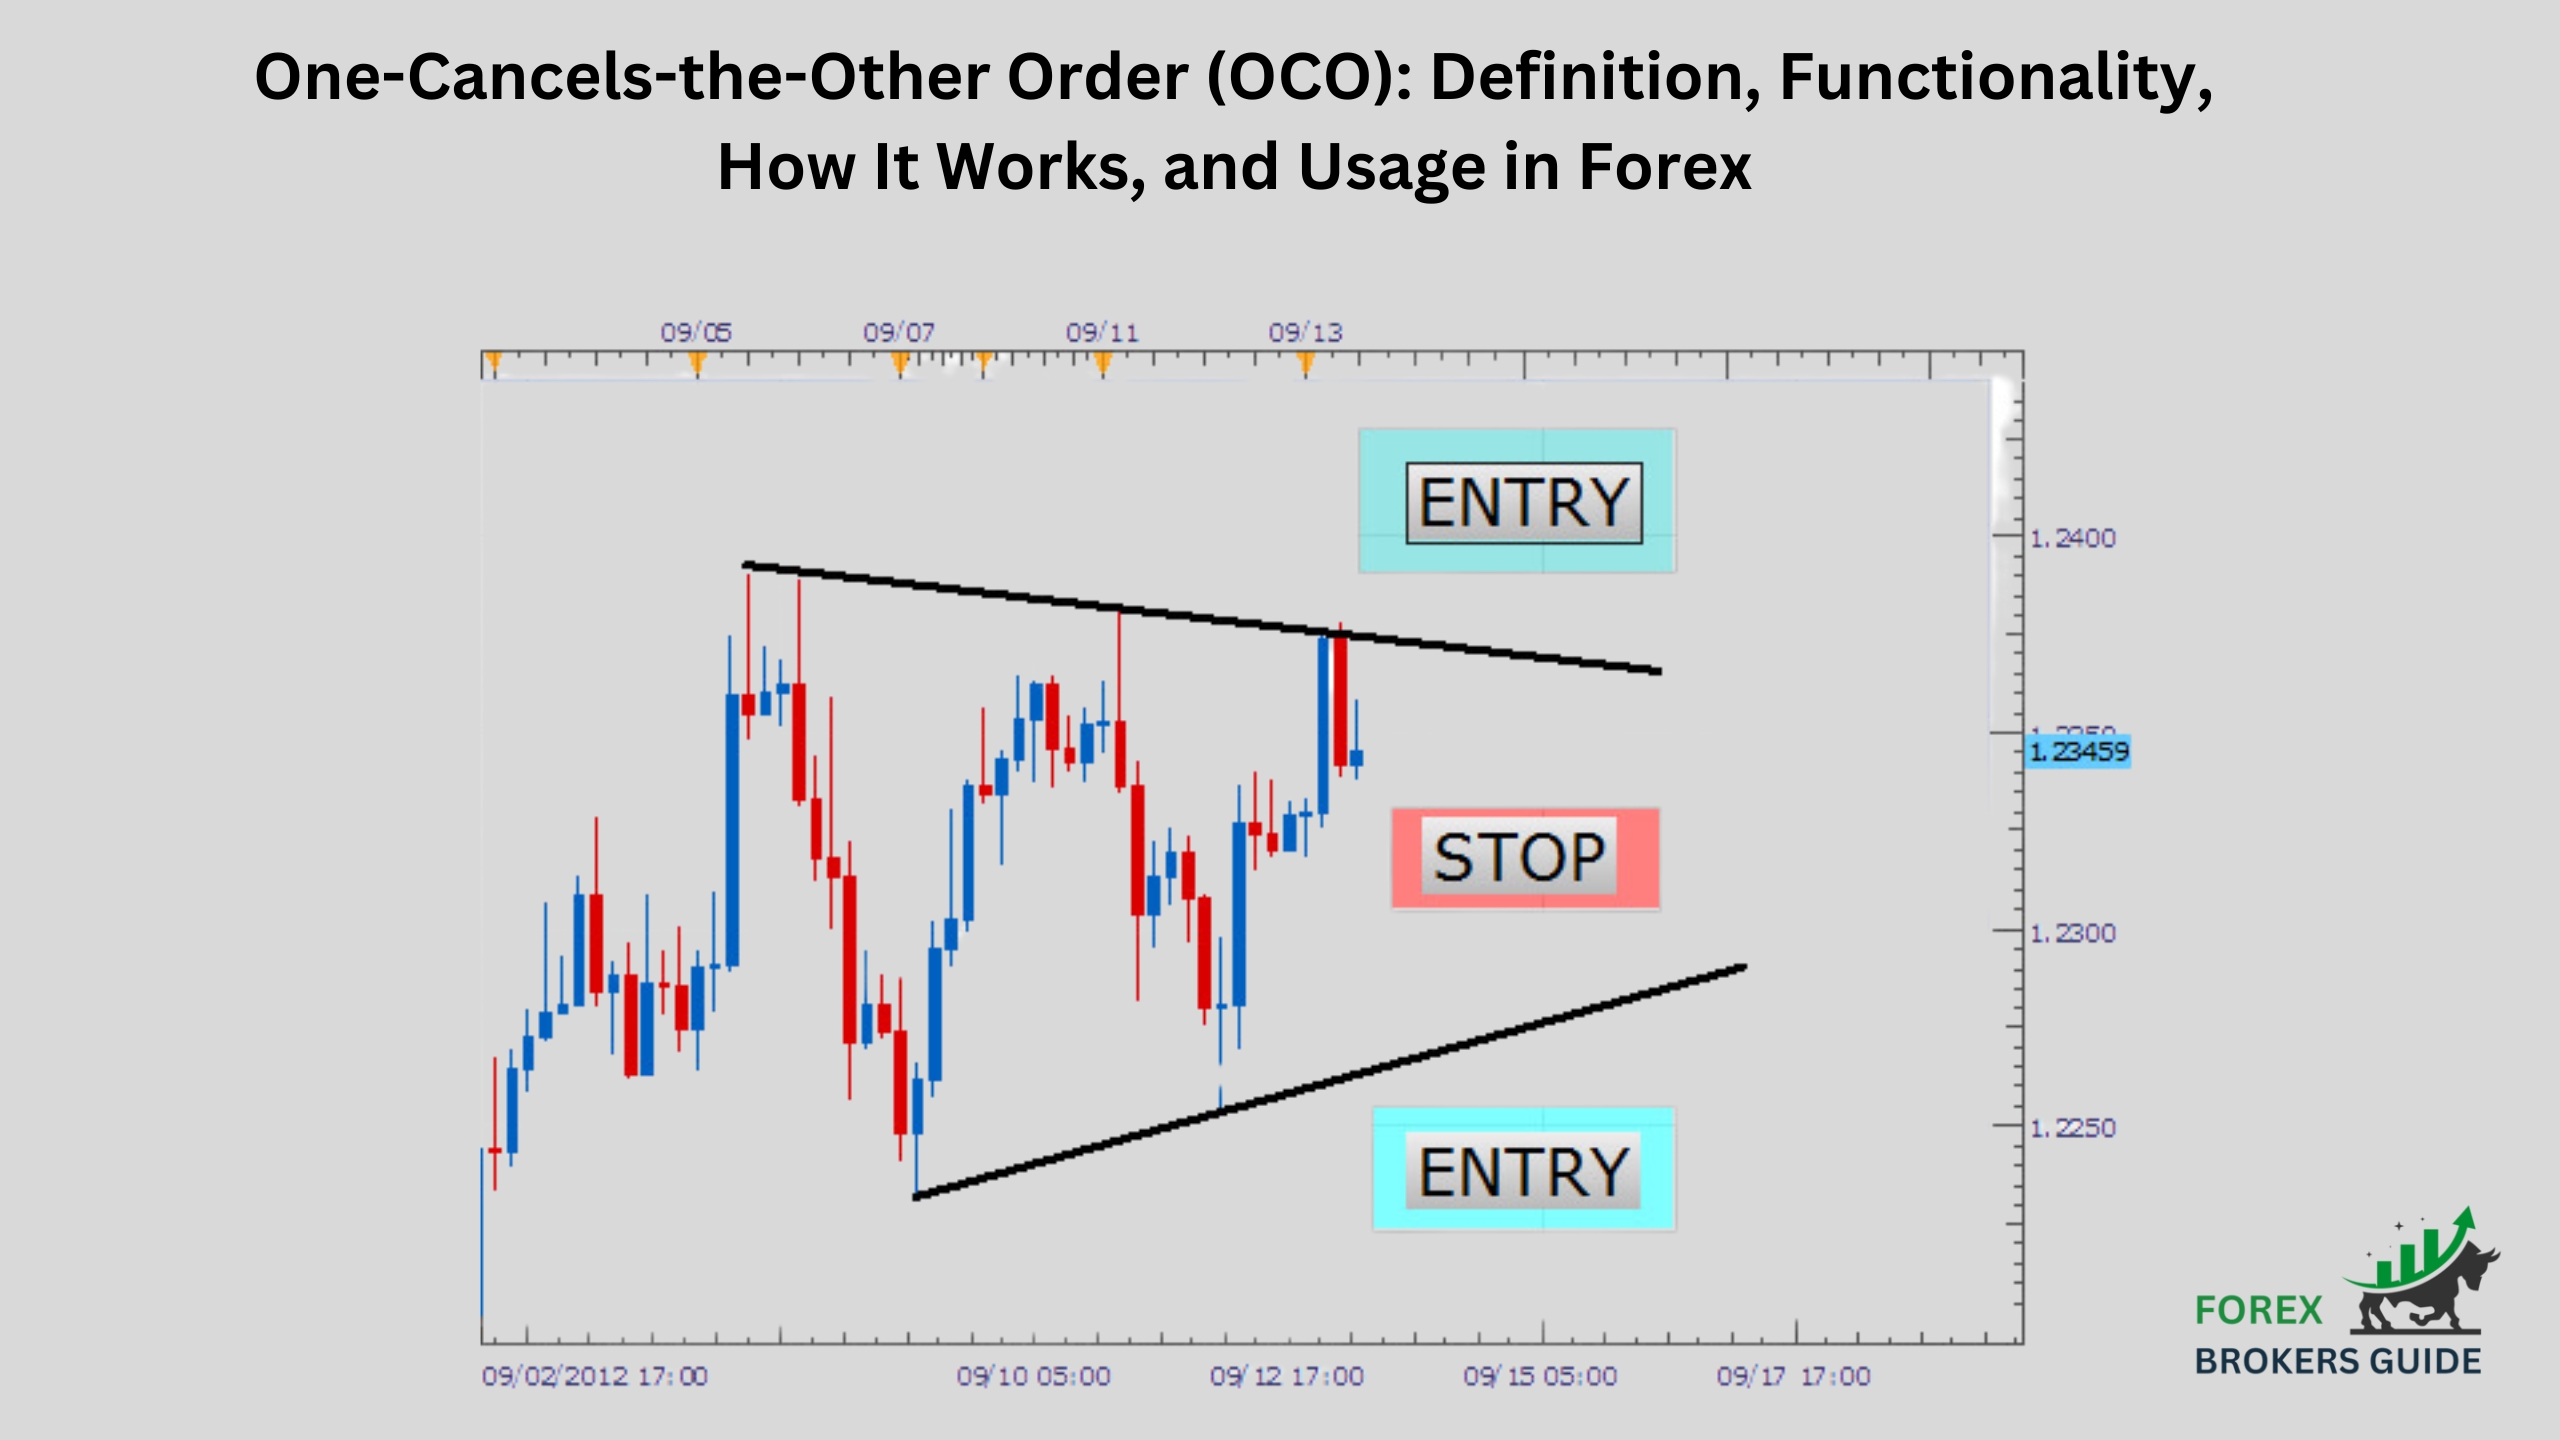 One-Cancels-the-Other Order (OCO) Definition, Functionality, How It Works, and Usage in Forex